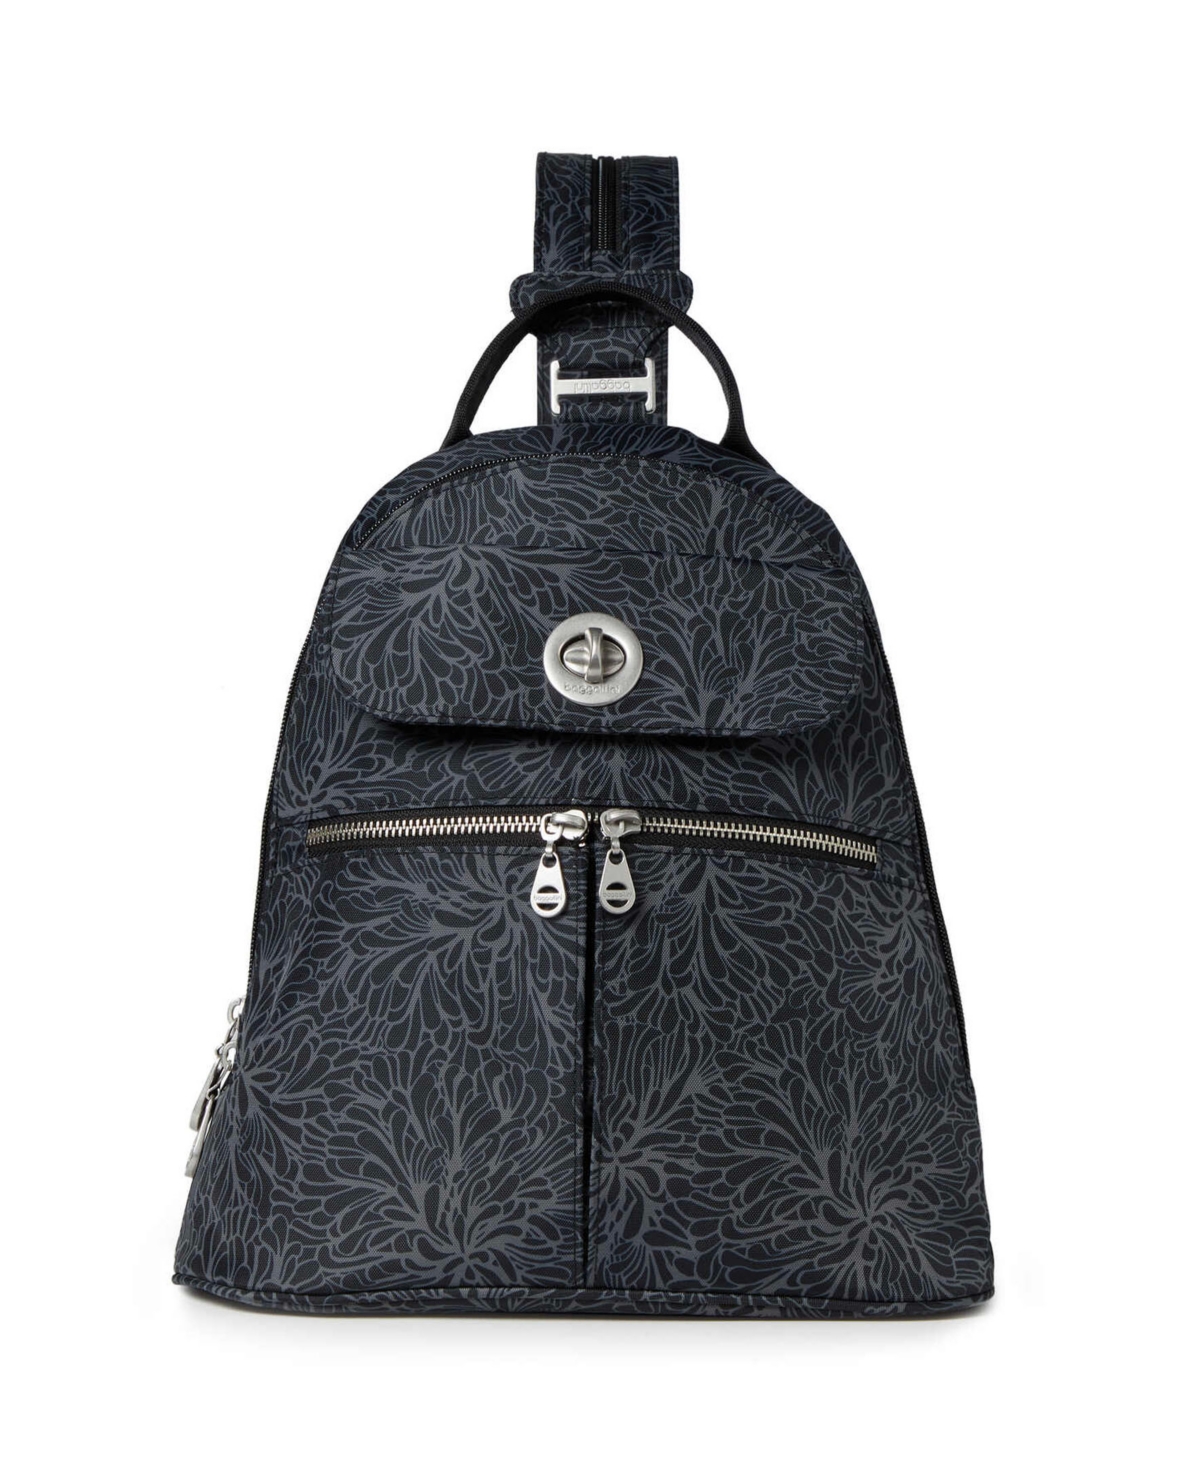 Backstage Baggallini Naples Convertible Backpack In Midnight Blossom